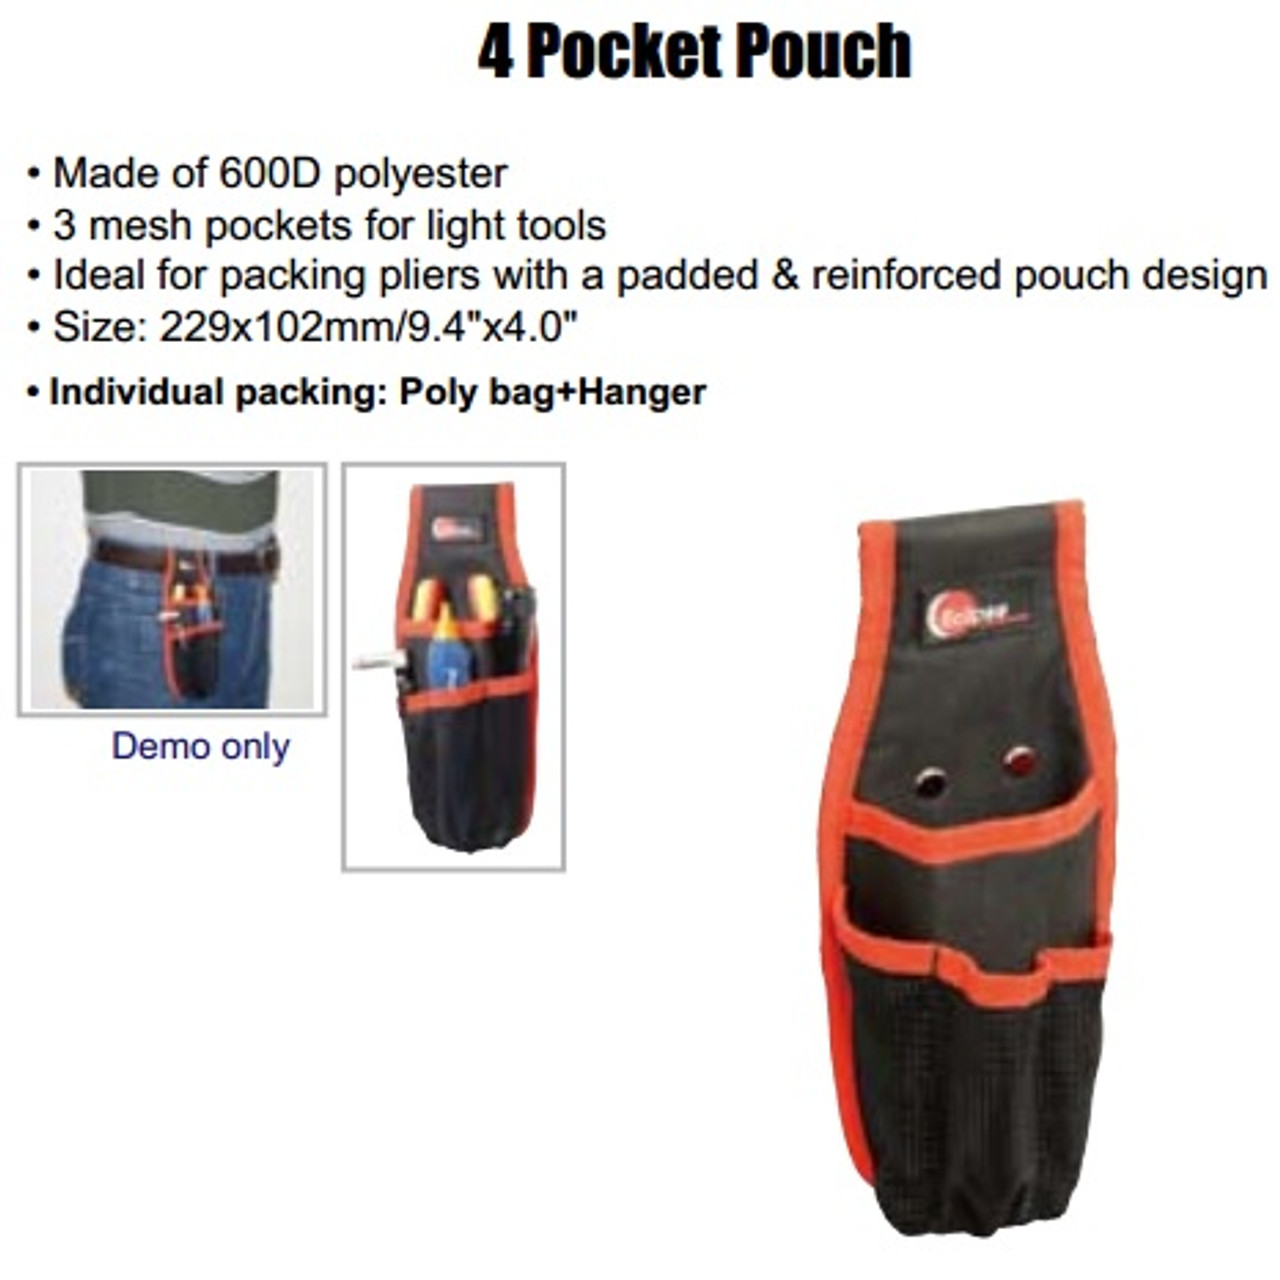 Pouch, 4 pocket pouch